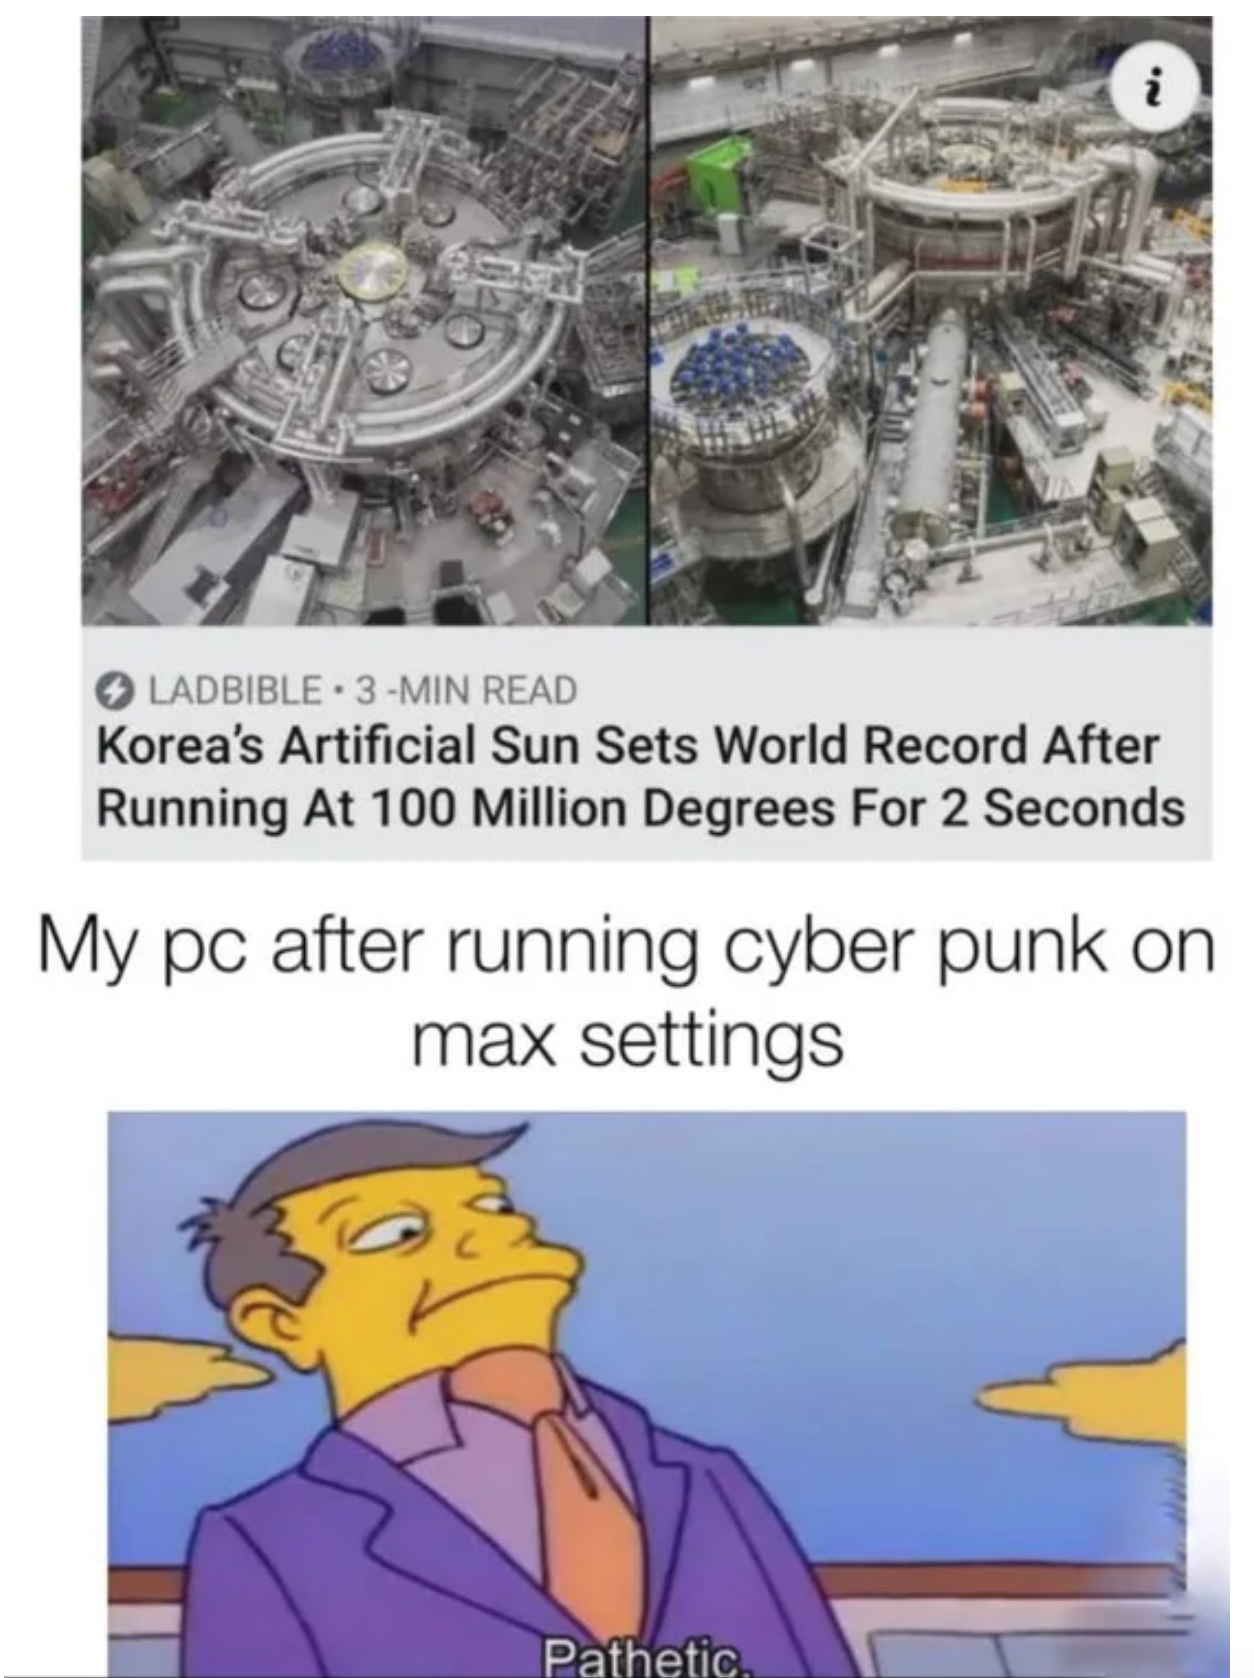 funny gaming memes  - korea artificial sun meme - Ladbible 3 Min Read Korea's Artificial Sun Sets World Record After Running At 100 Million Degrees For 2 Seconds My pc after running cyber punk on max settings Pathetic